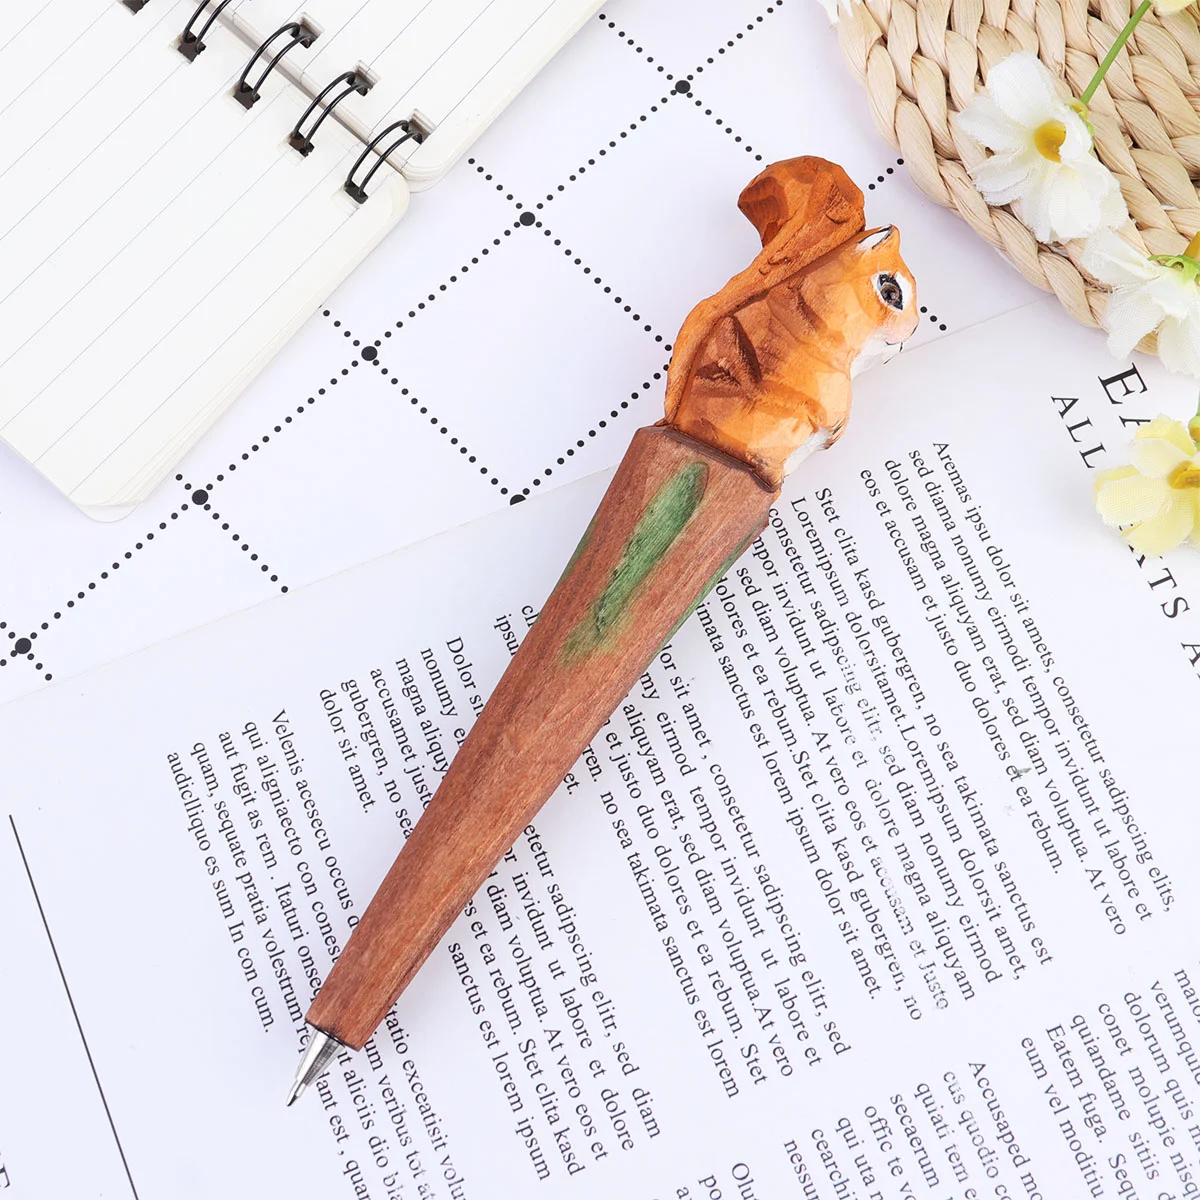 Pure Handmade Wood Carving Animal Pen Creative Wood Carving Squirrel Ballpoint Pen Replaceable Refill Gel Pen for Students wood grip non skid handle chopping replacement replaceable practical wooden